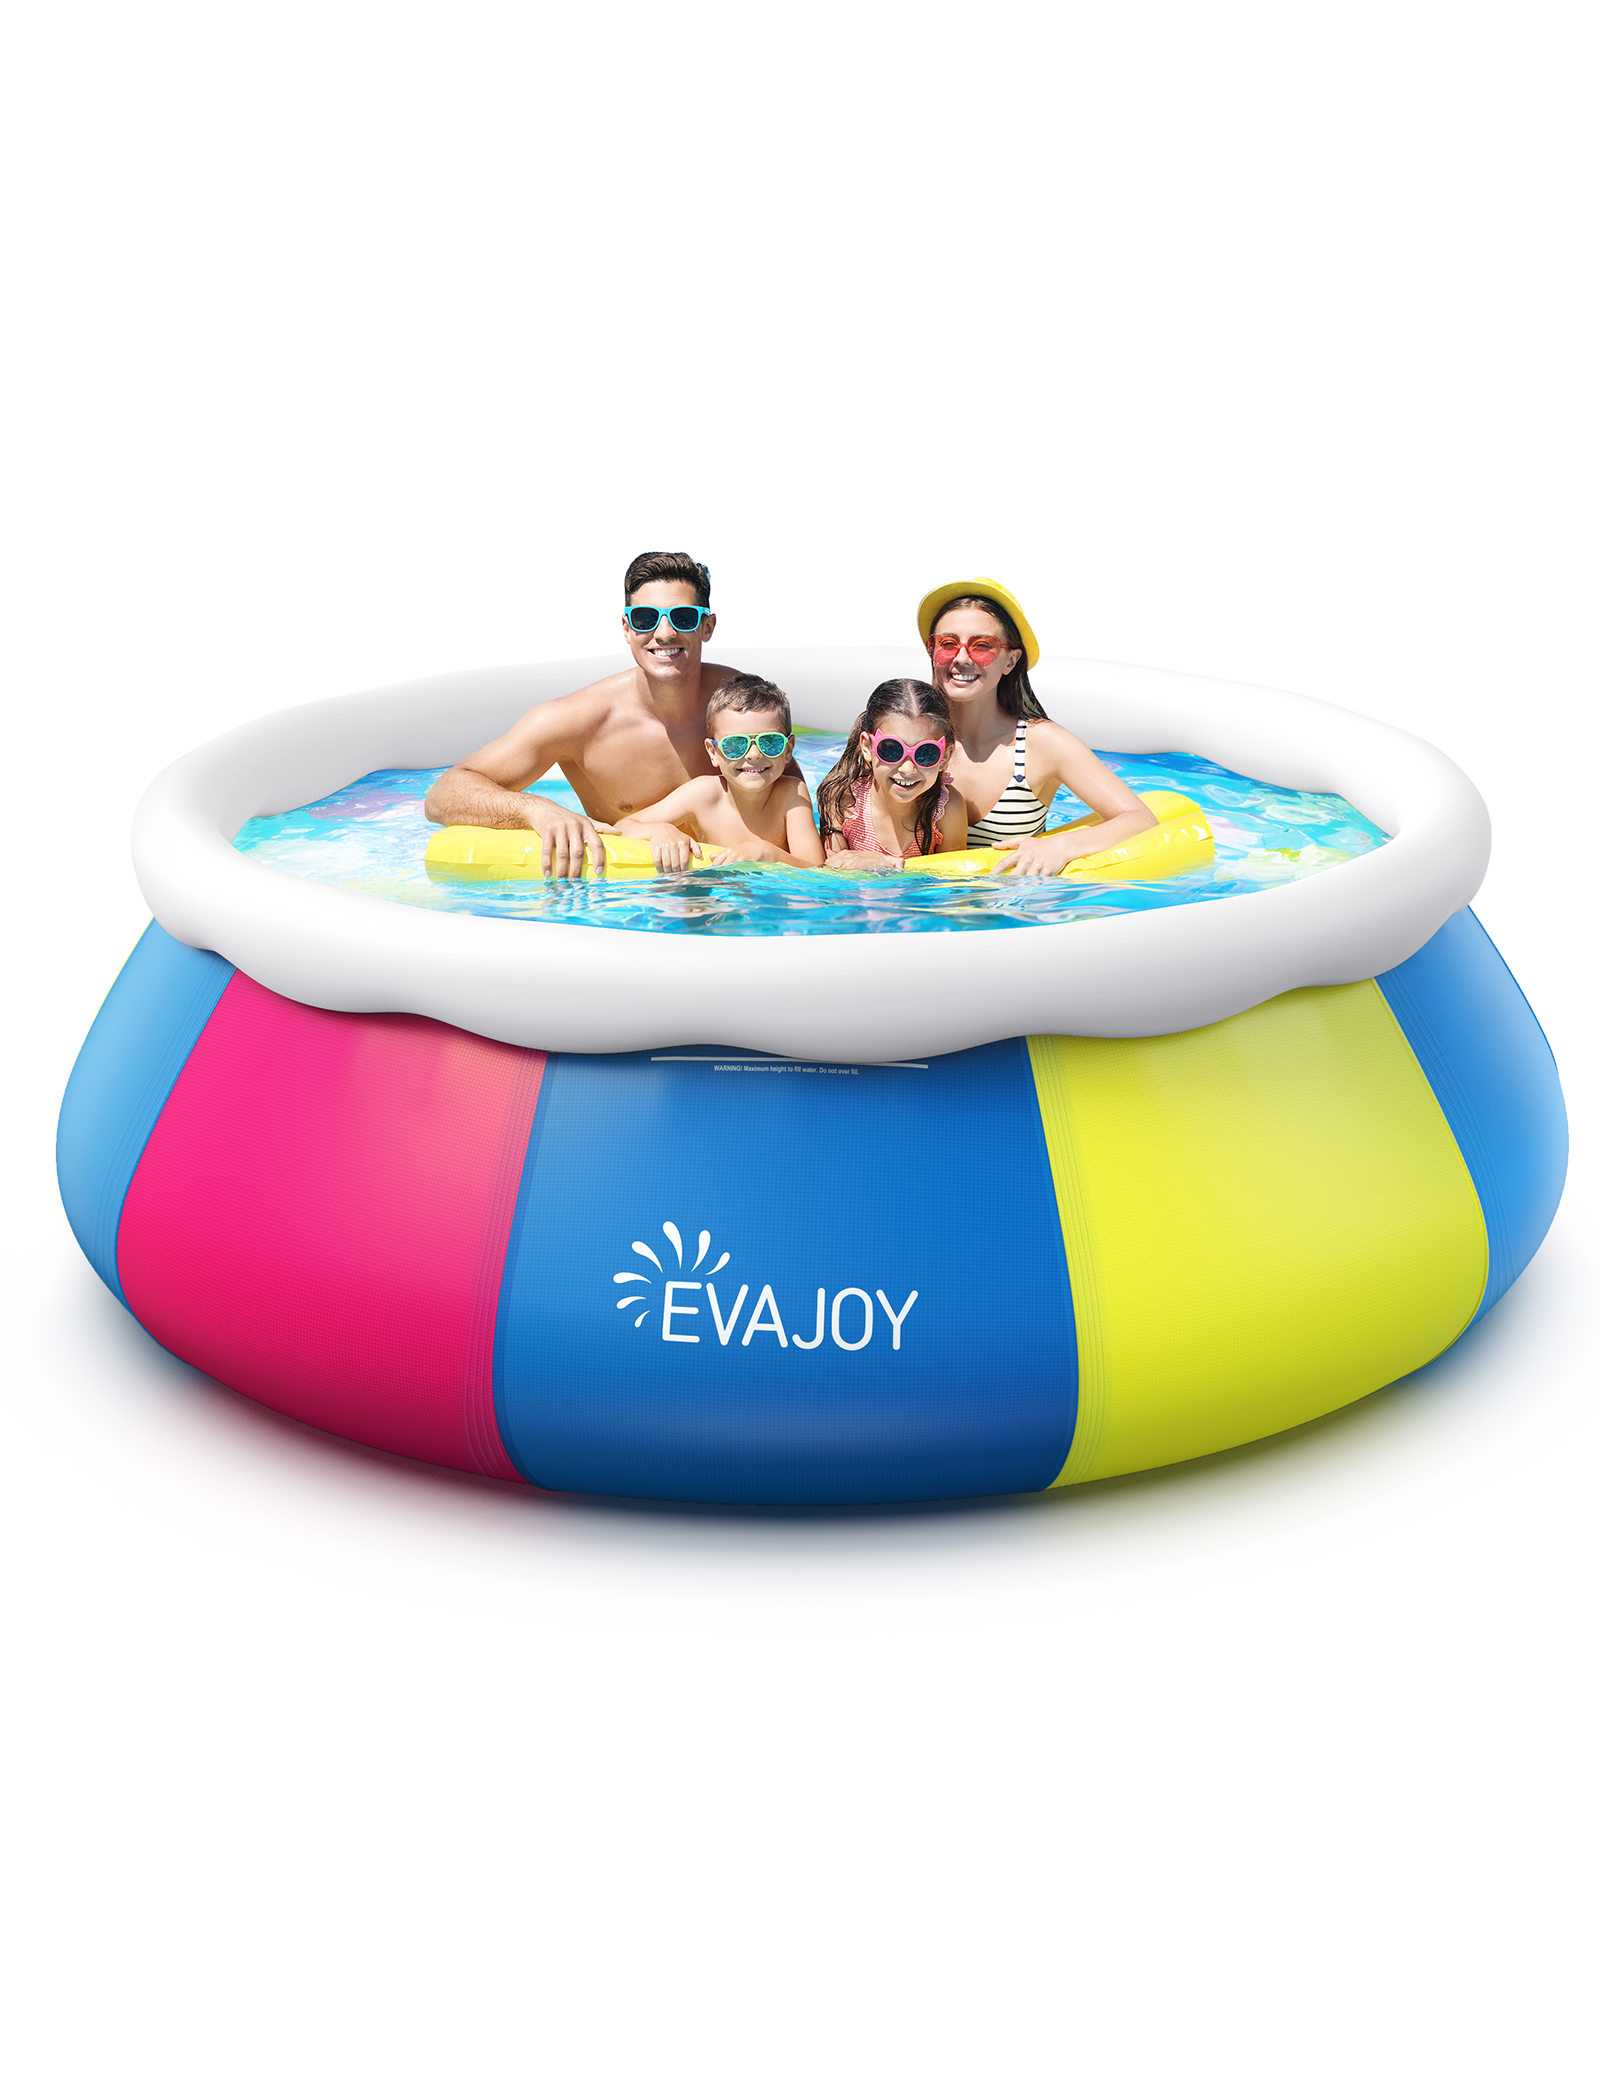 Easy　Pool　Outdoor　Above　Pools　Up　Kiddie　Pool,　Swimming　Backyard　Pool　10ft　EVAJOY　Adults　Swimming　Family　Pool　Cover　×30in　Top　Ground　Blow　with　Set,　Inflatable　for　Ring　Pool